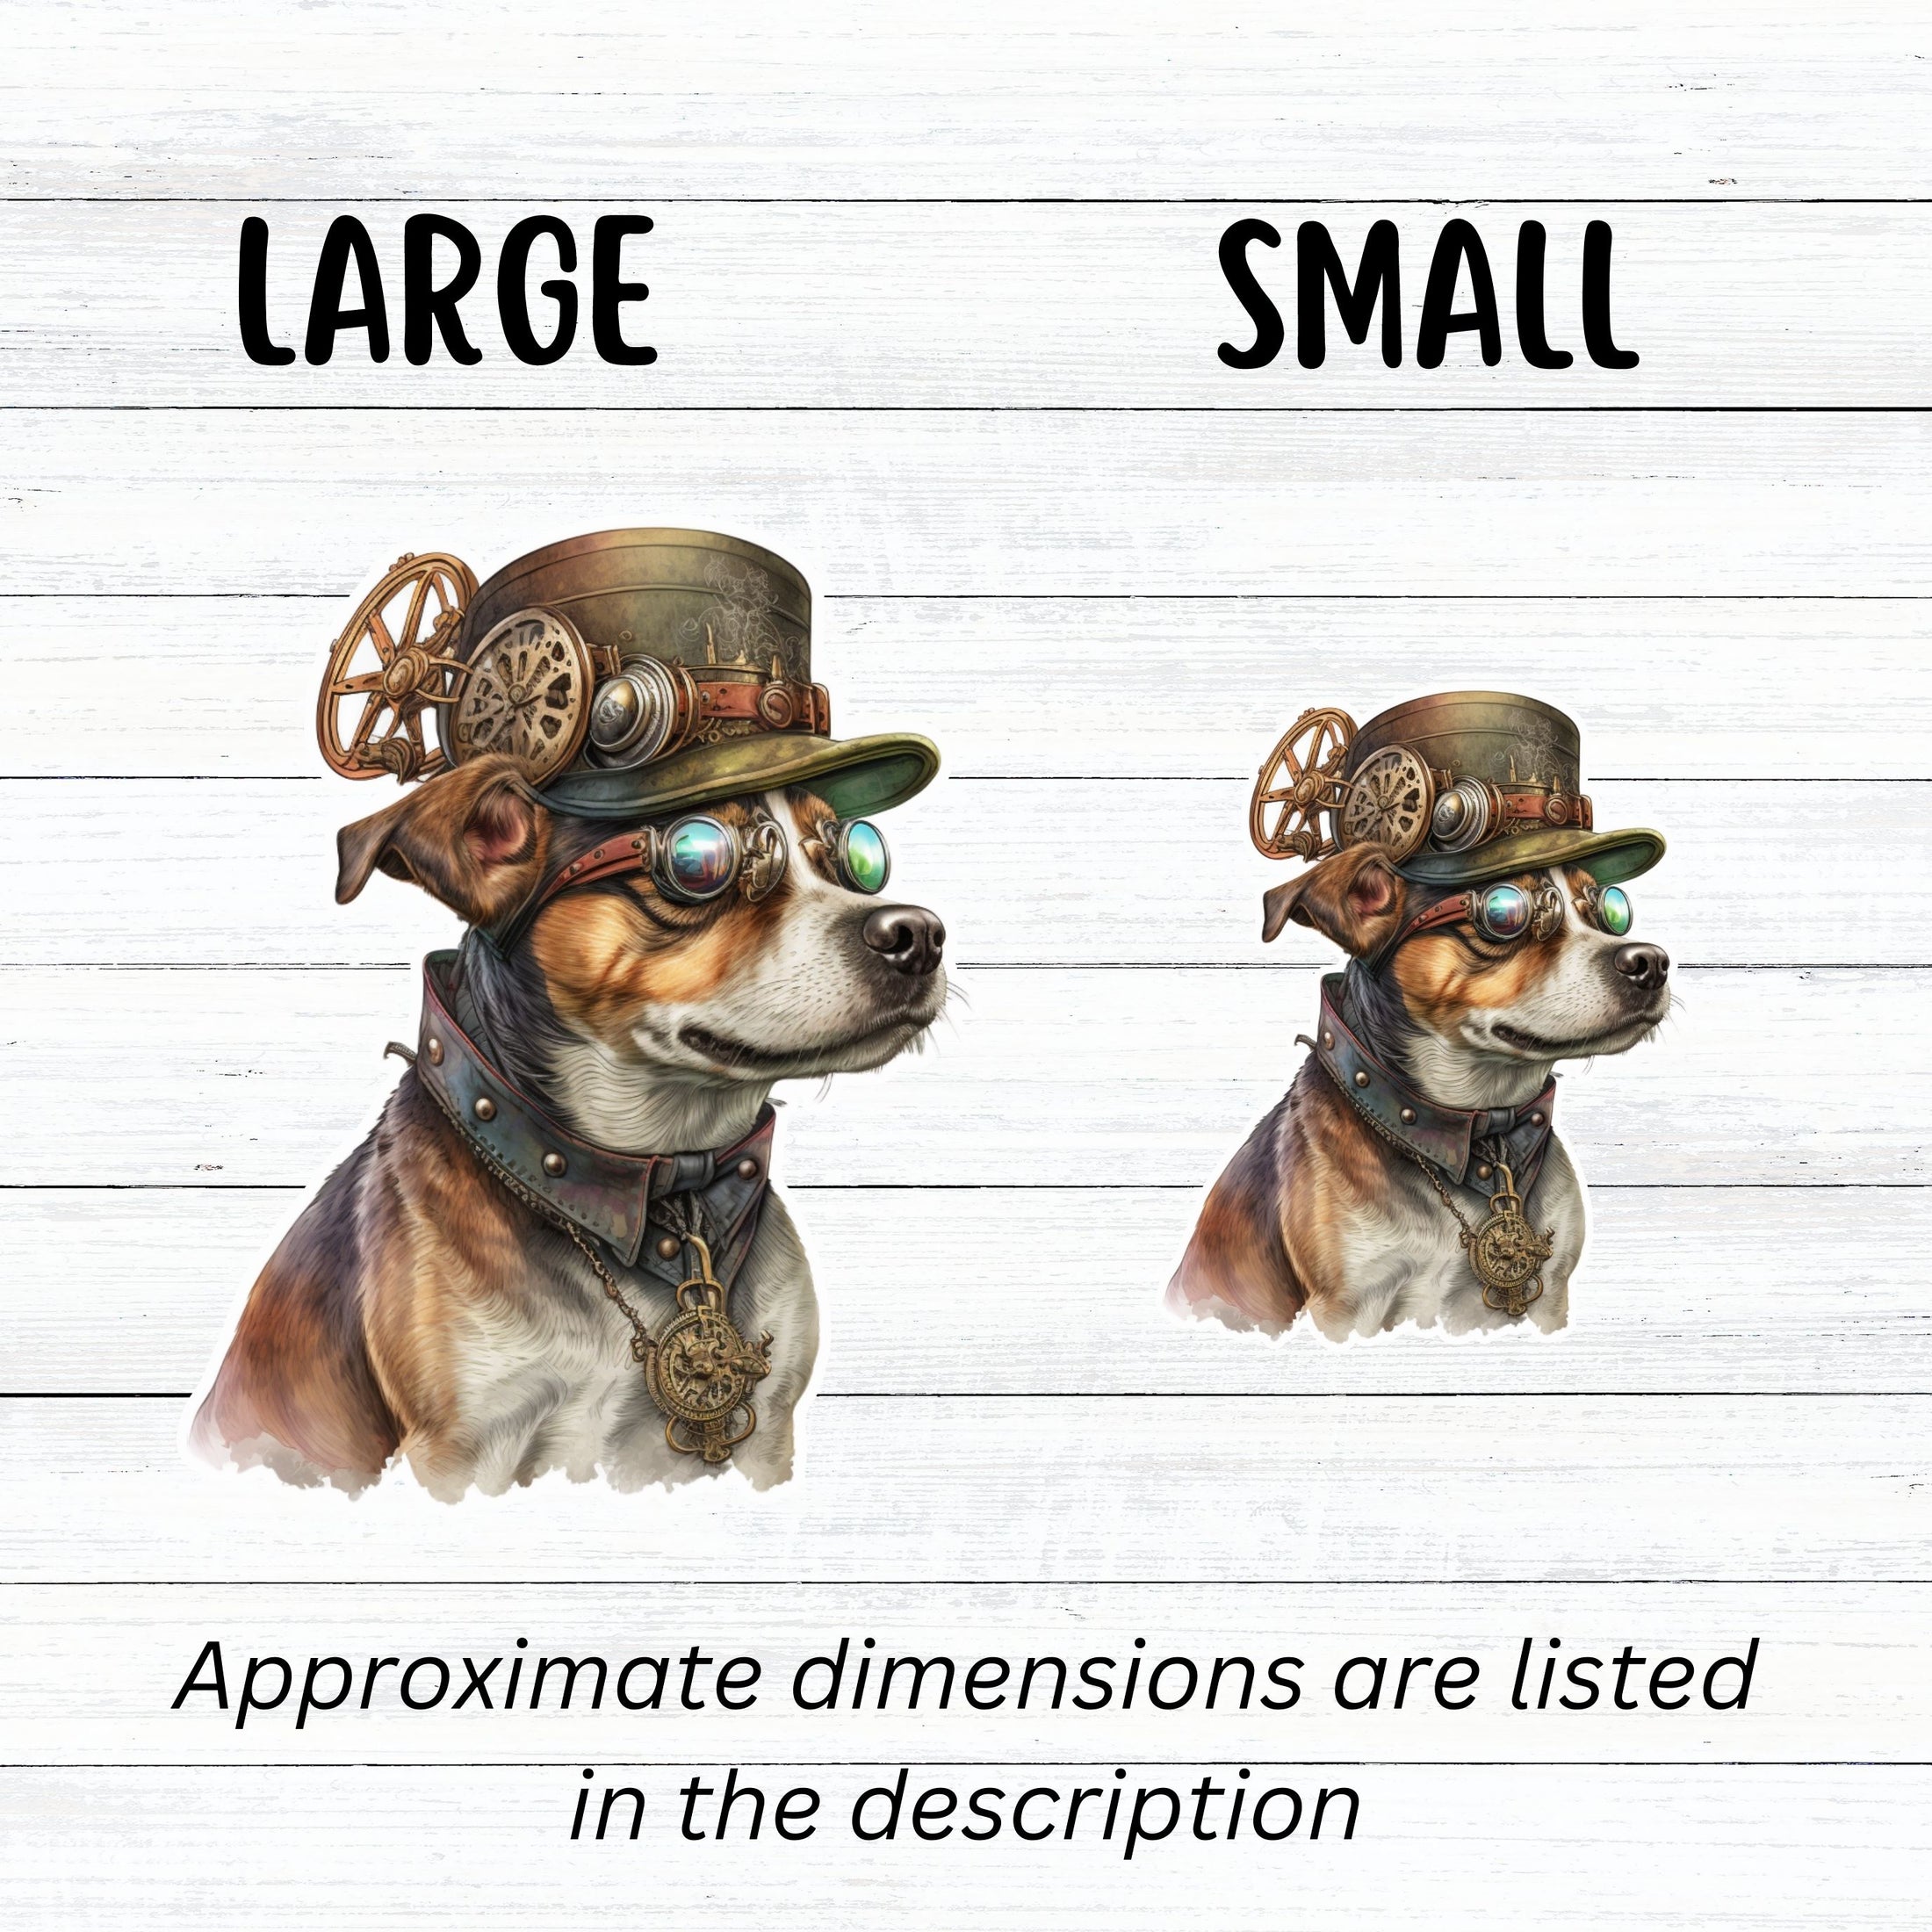 This image shows large and small steampunk dog stickers next to each other.